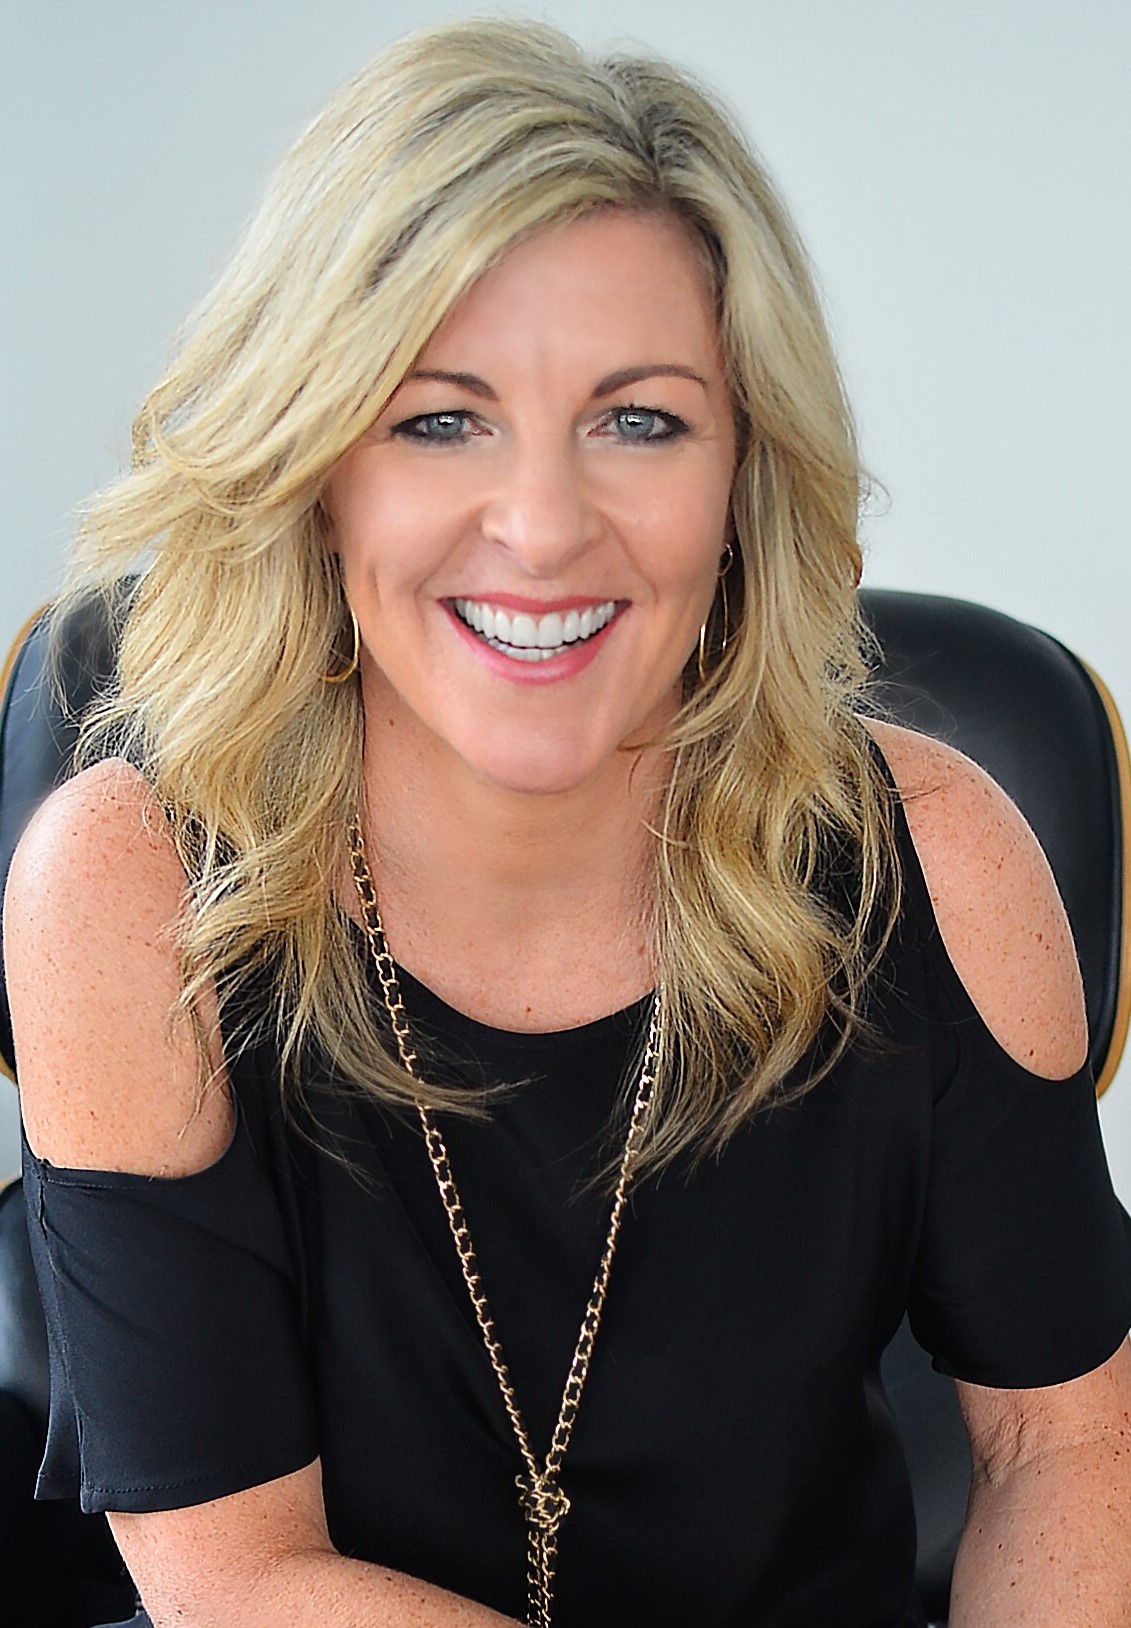 Janine Brolly, Speaker, Author, 7 Figure business owner, helping women own their power Image